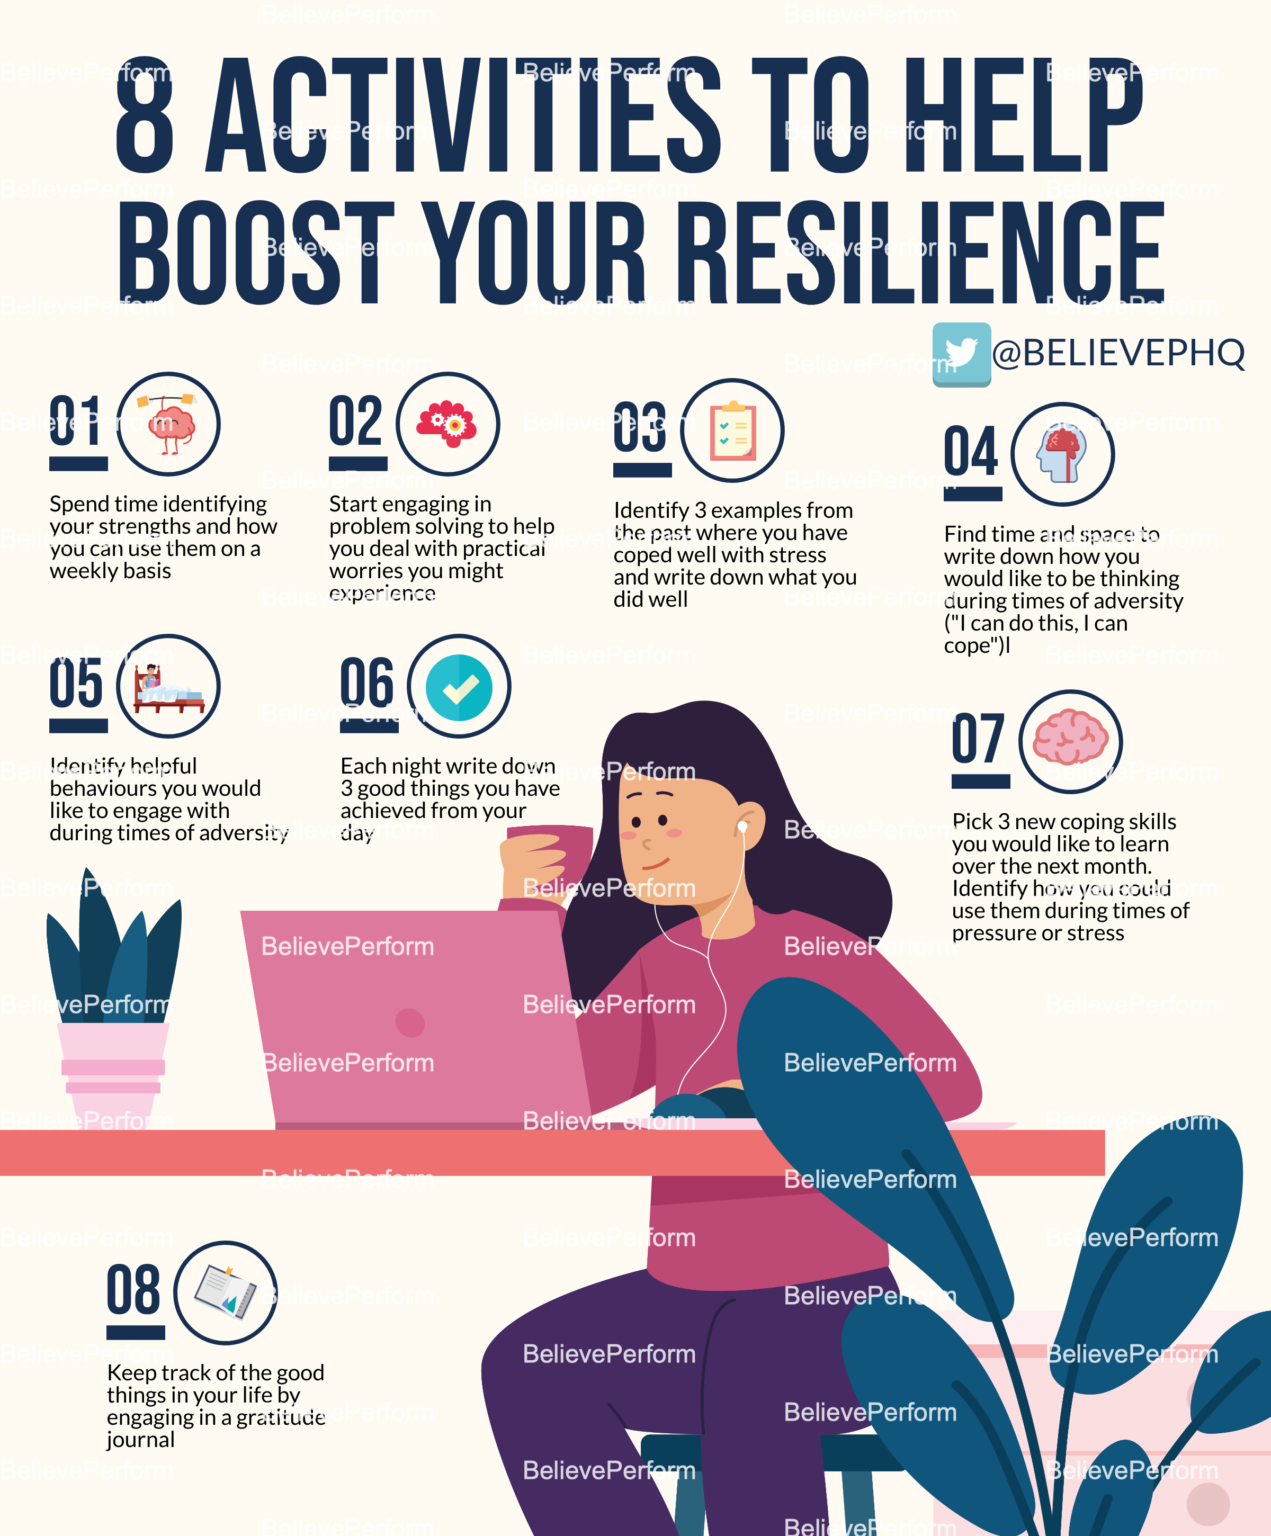 8 Activities To Help Boost Your Resilience 1271x1536 